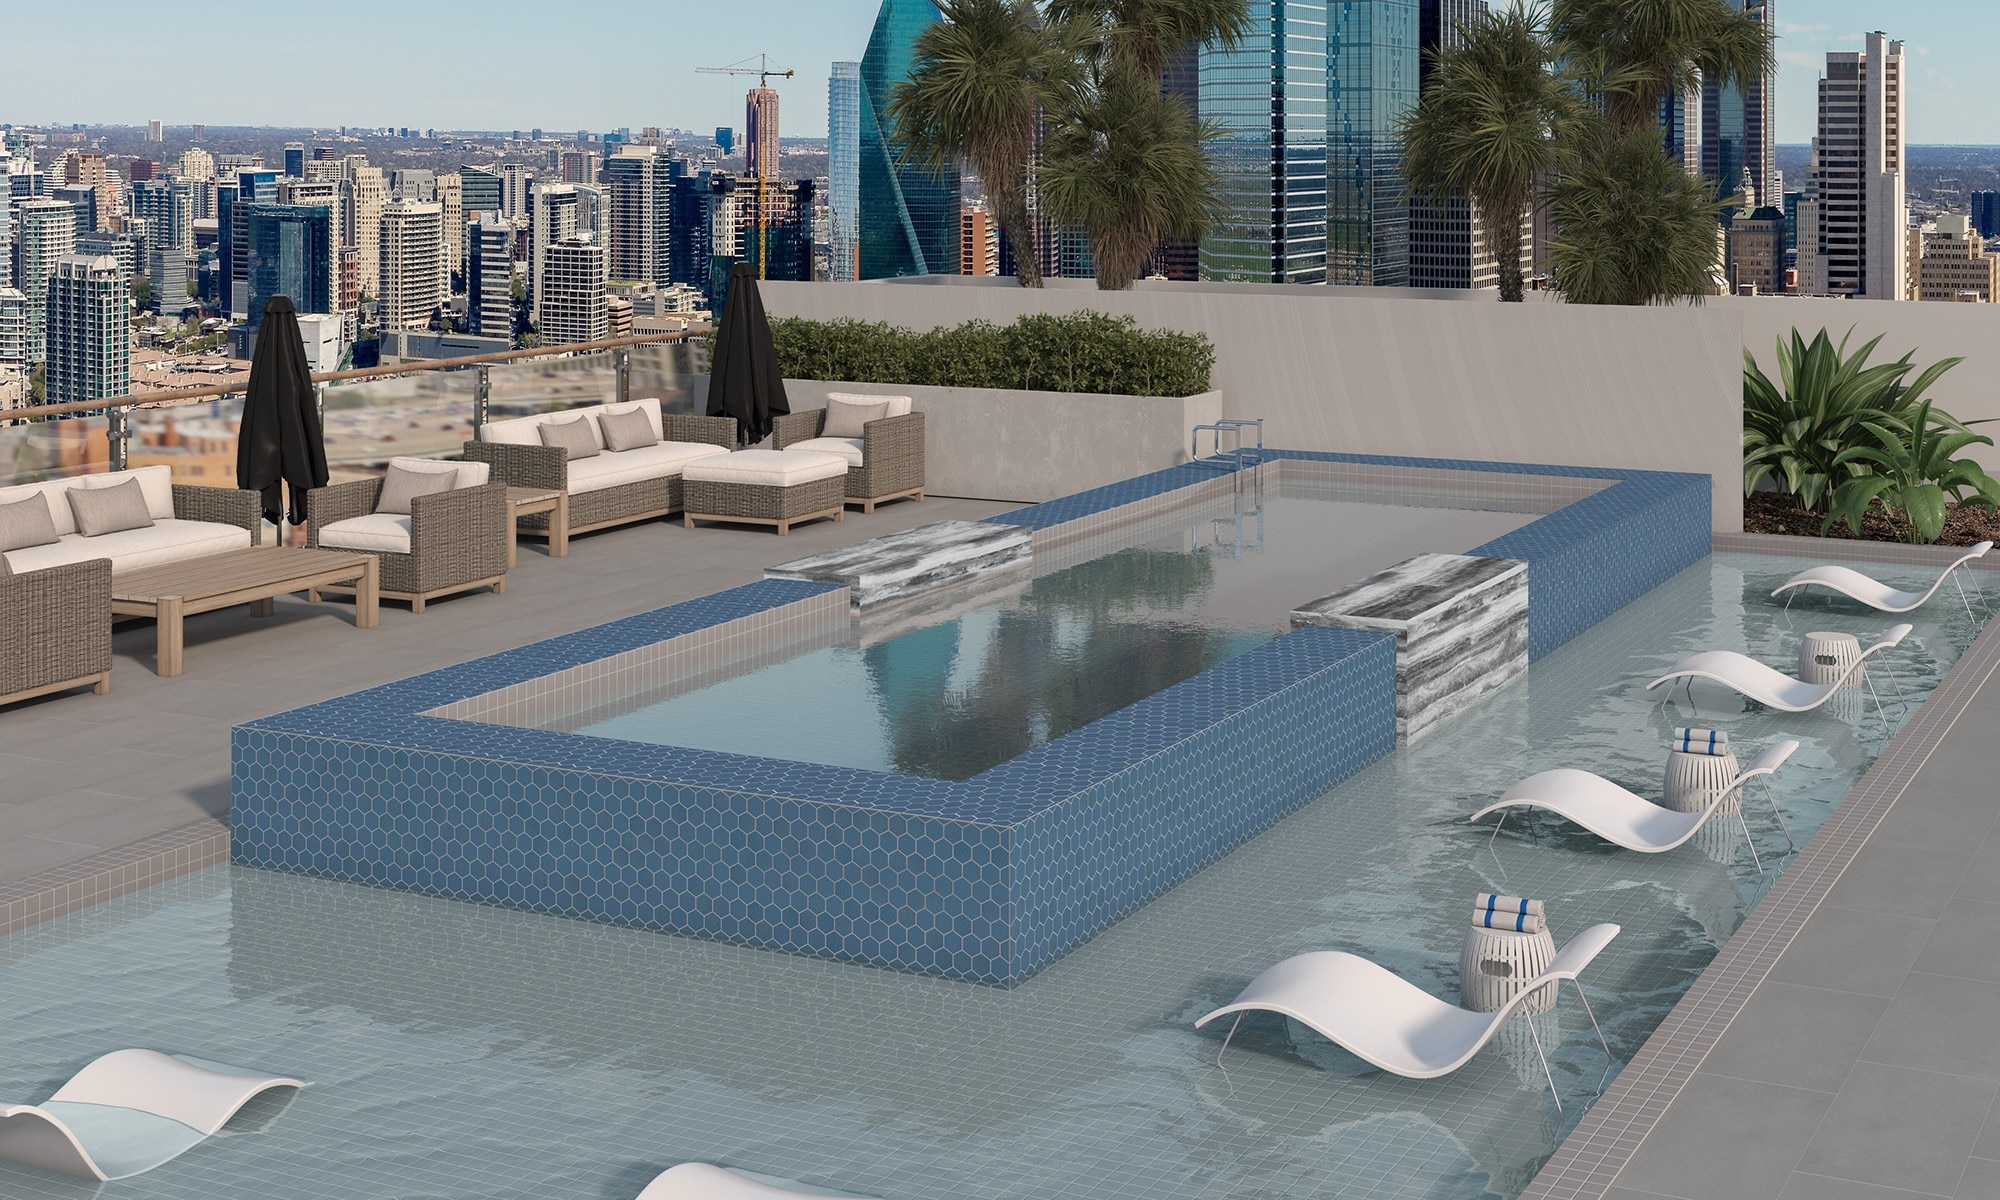 Rooftop pool with gray slip-resistance pool deck tile that looks like concrete, blue mosaic pool tile, gray mosaic tile pool border, and view of city skyline. 